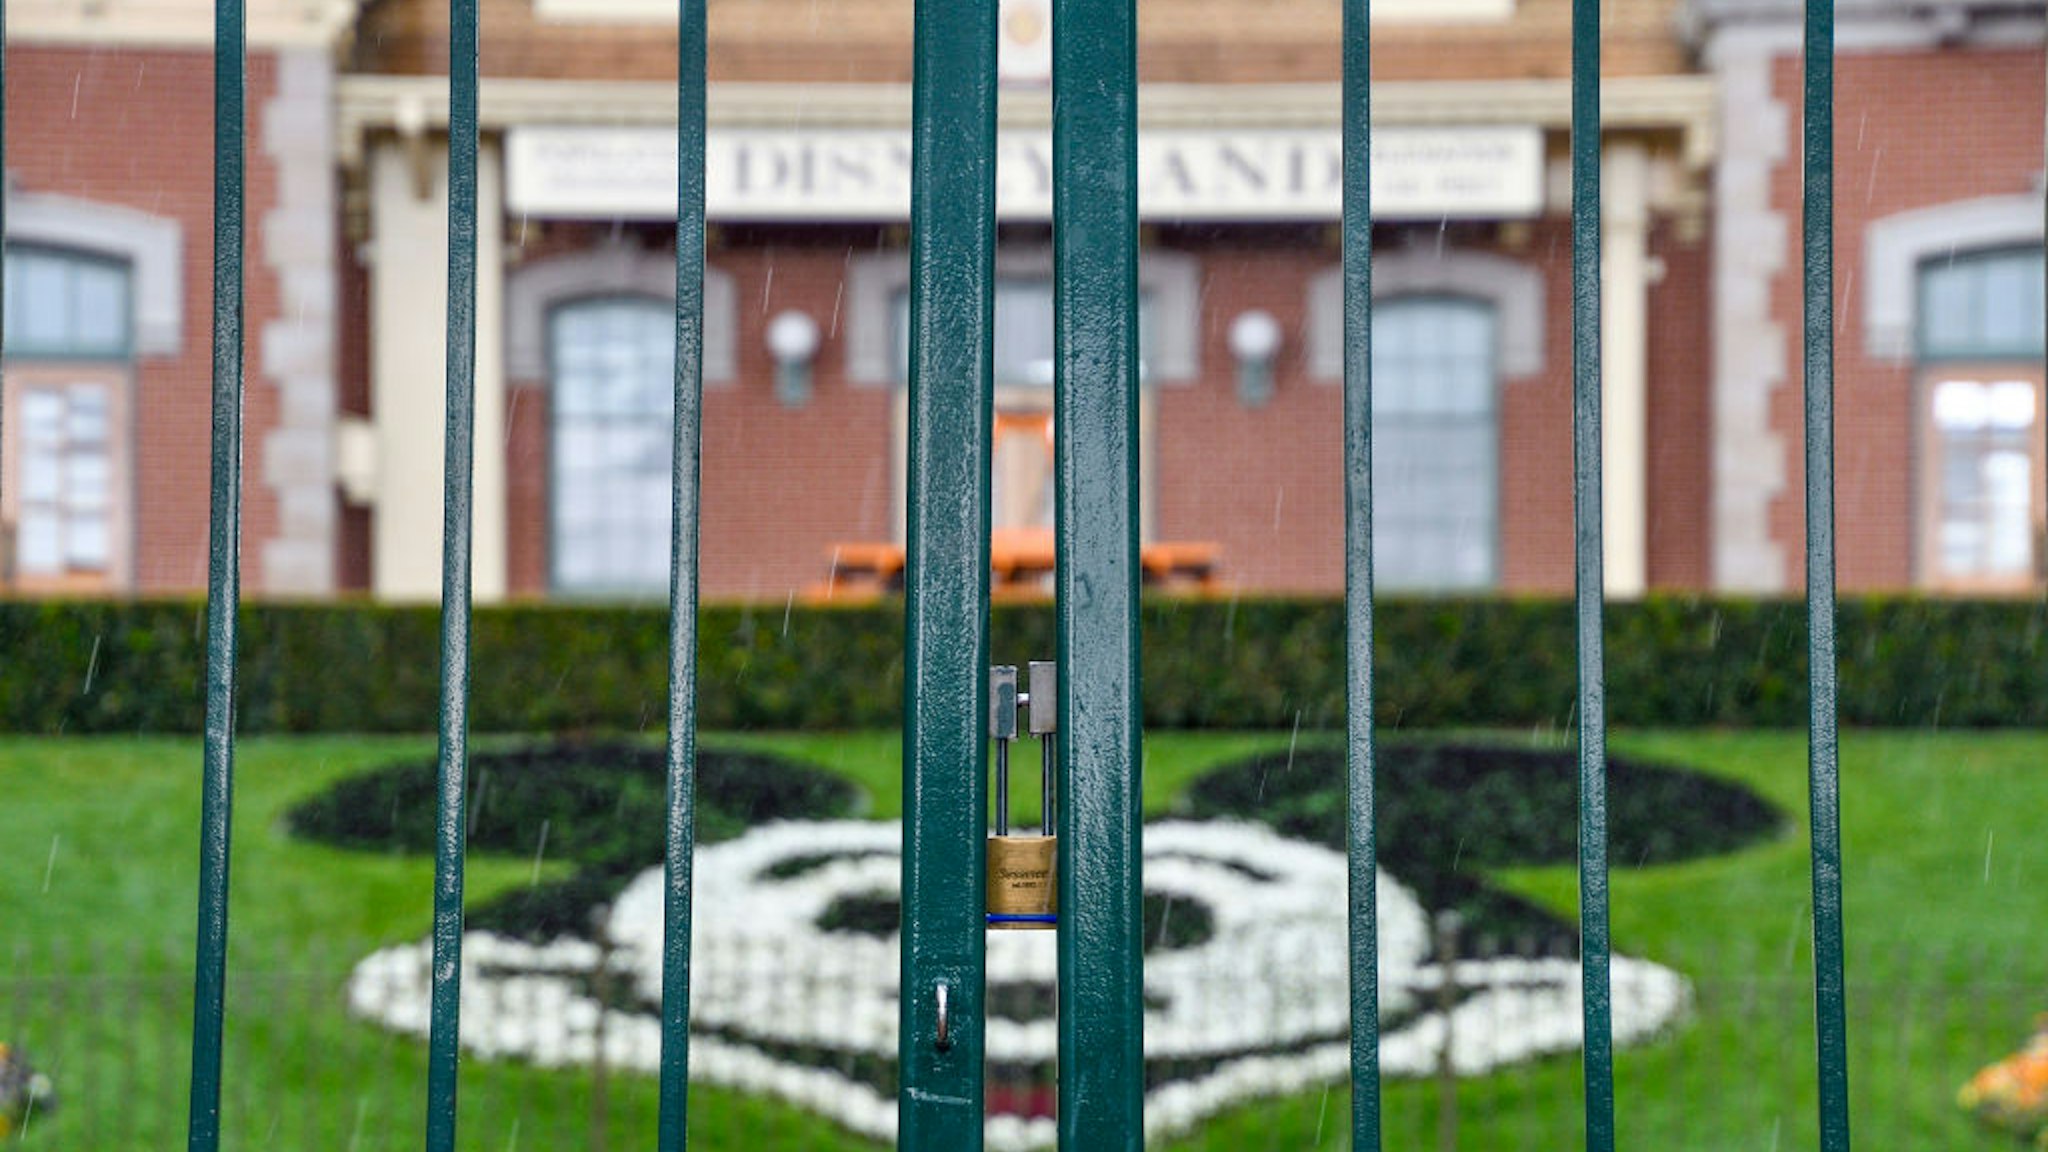 ANAHEIM, CA - MARCH 16: A lock hangs on the center gate between the turnstiles at the entrance to Disneyland in Anaheim, CA, on Monday, Mar 16, 2020. The entire Disneyland Resort is shutting down due to the coronavirus (COVID-19) outbreak. (Photo by Jeff Gritchen/MediaNews Group/Orange County Register via Getty Images)